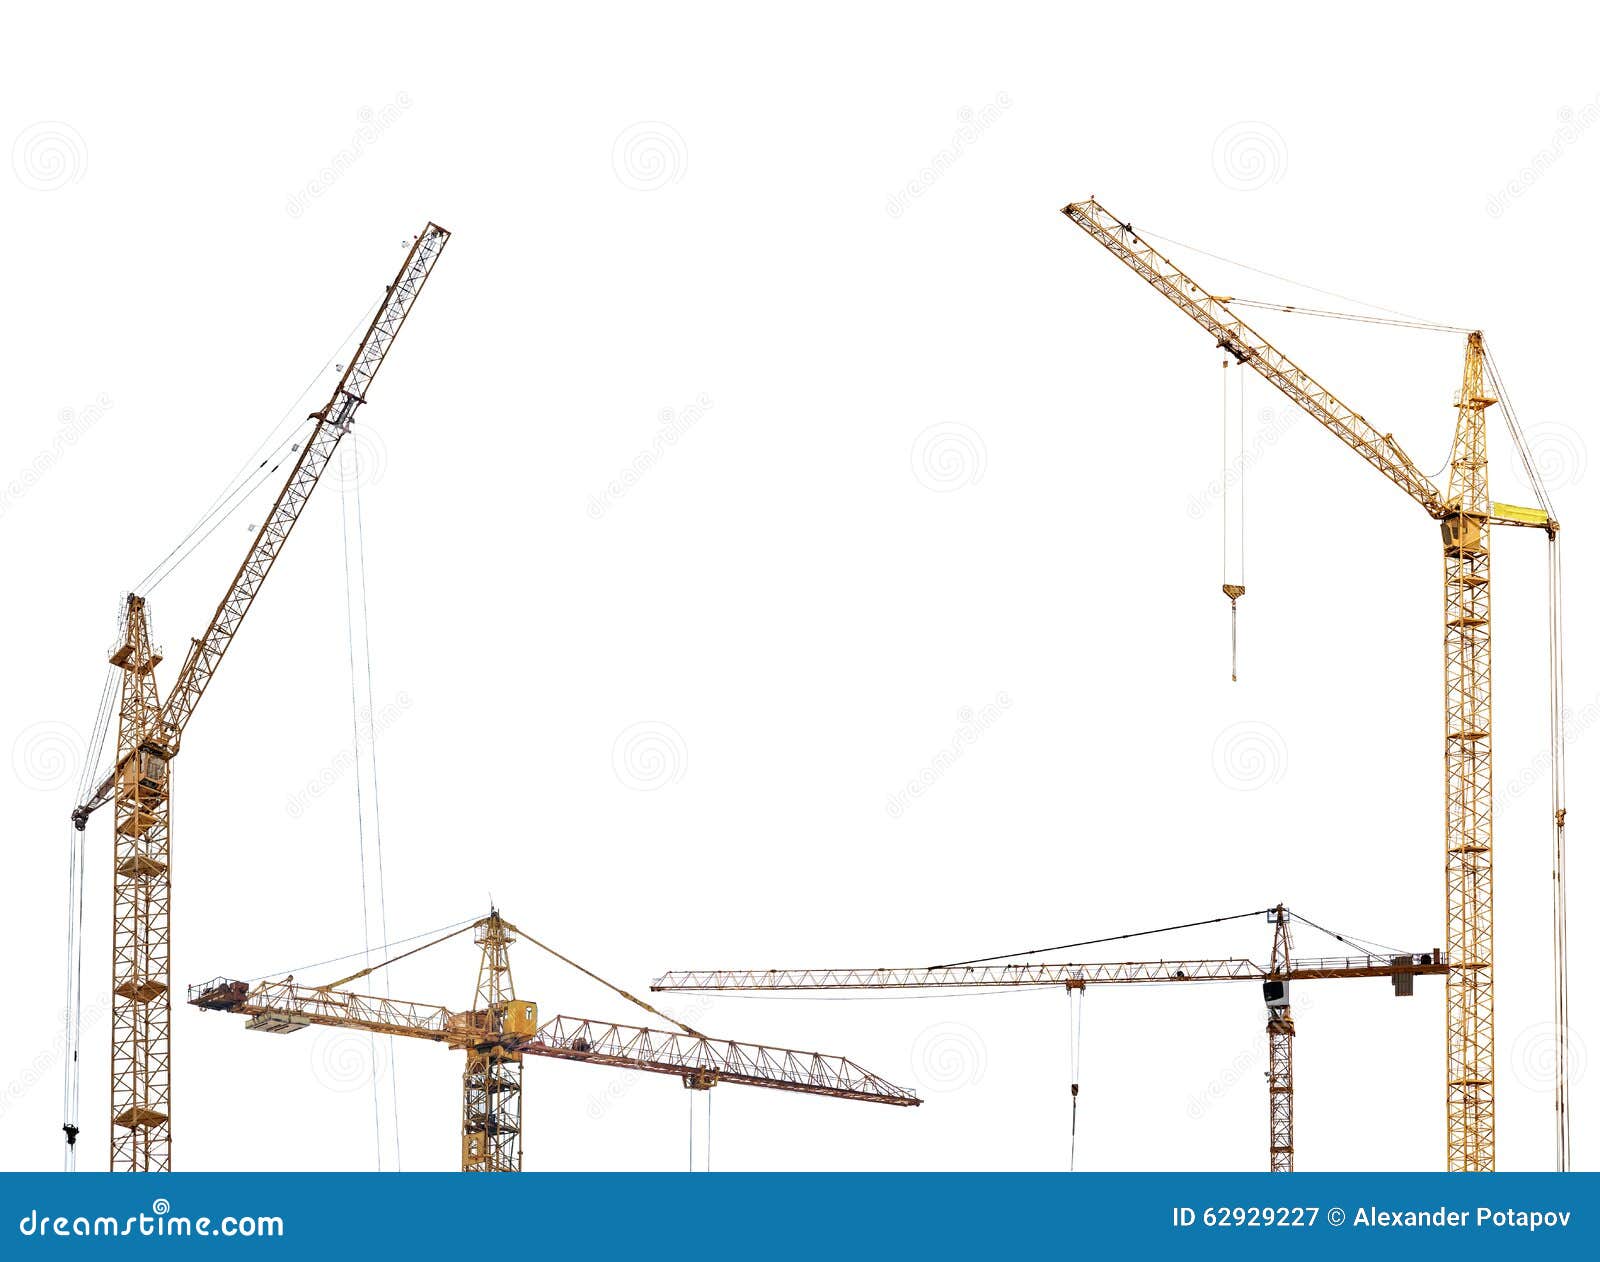 half frame from yellow hoisting cranes isolate on white